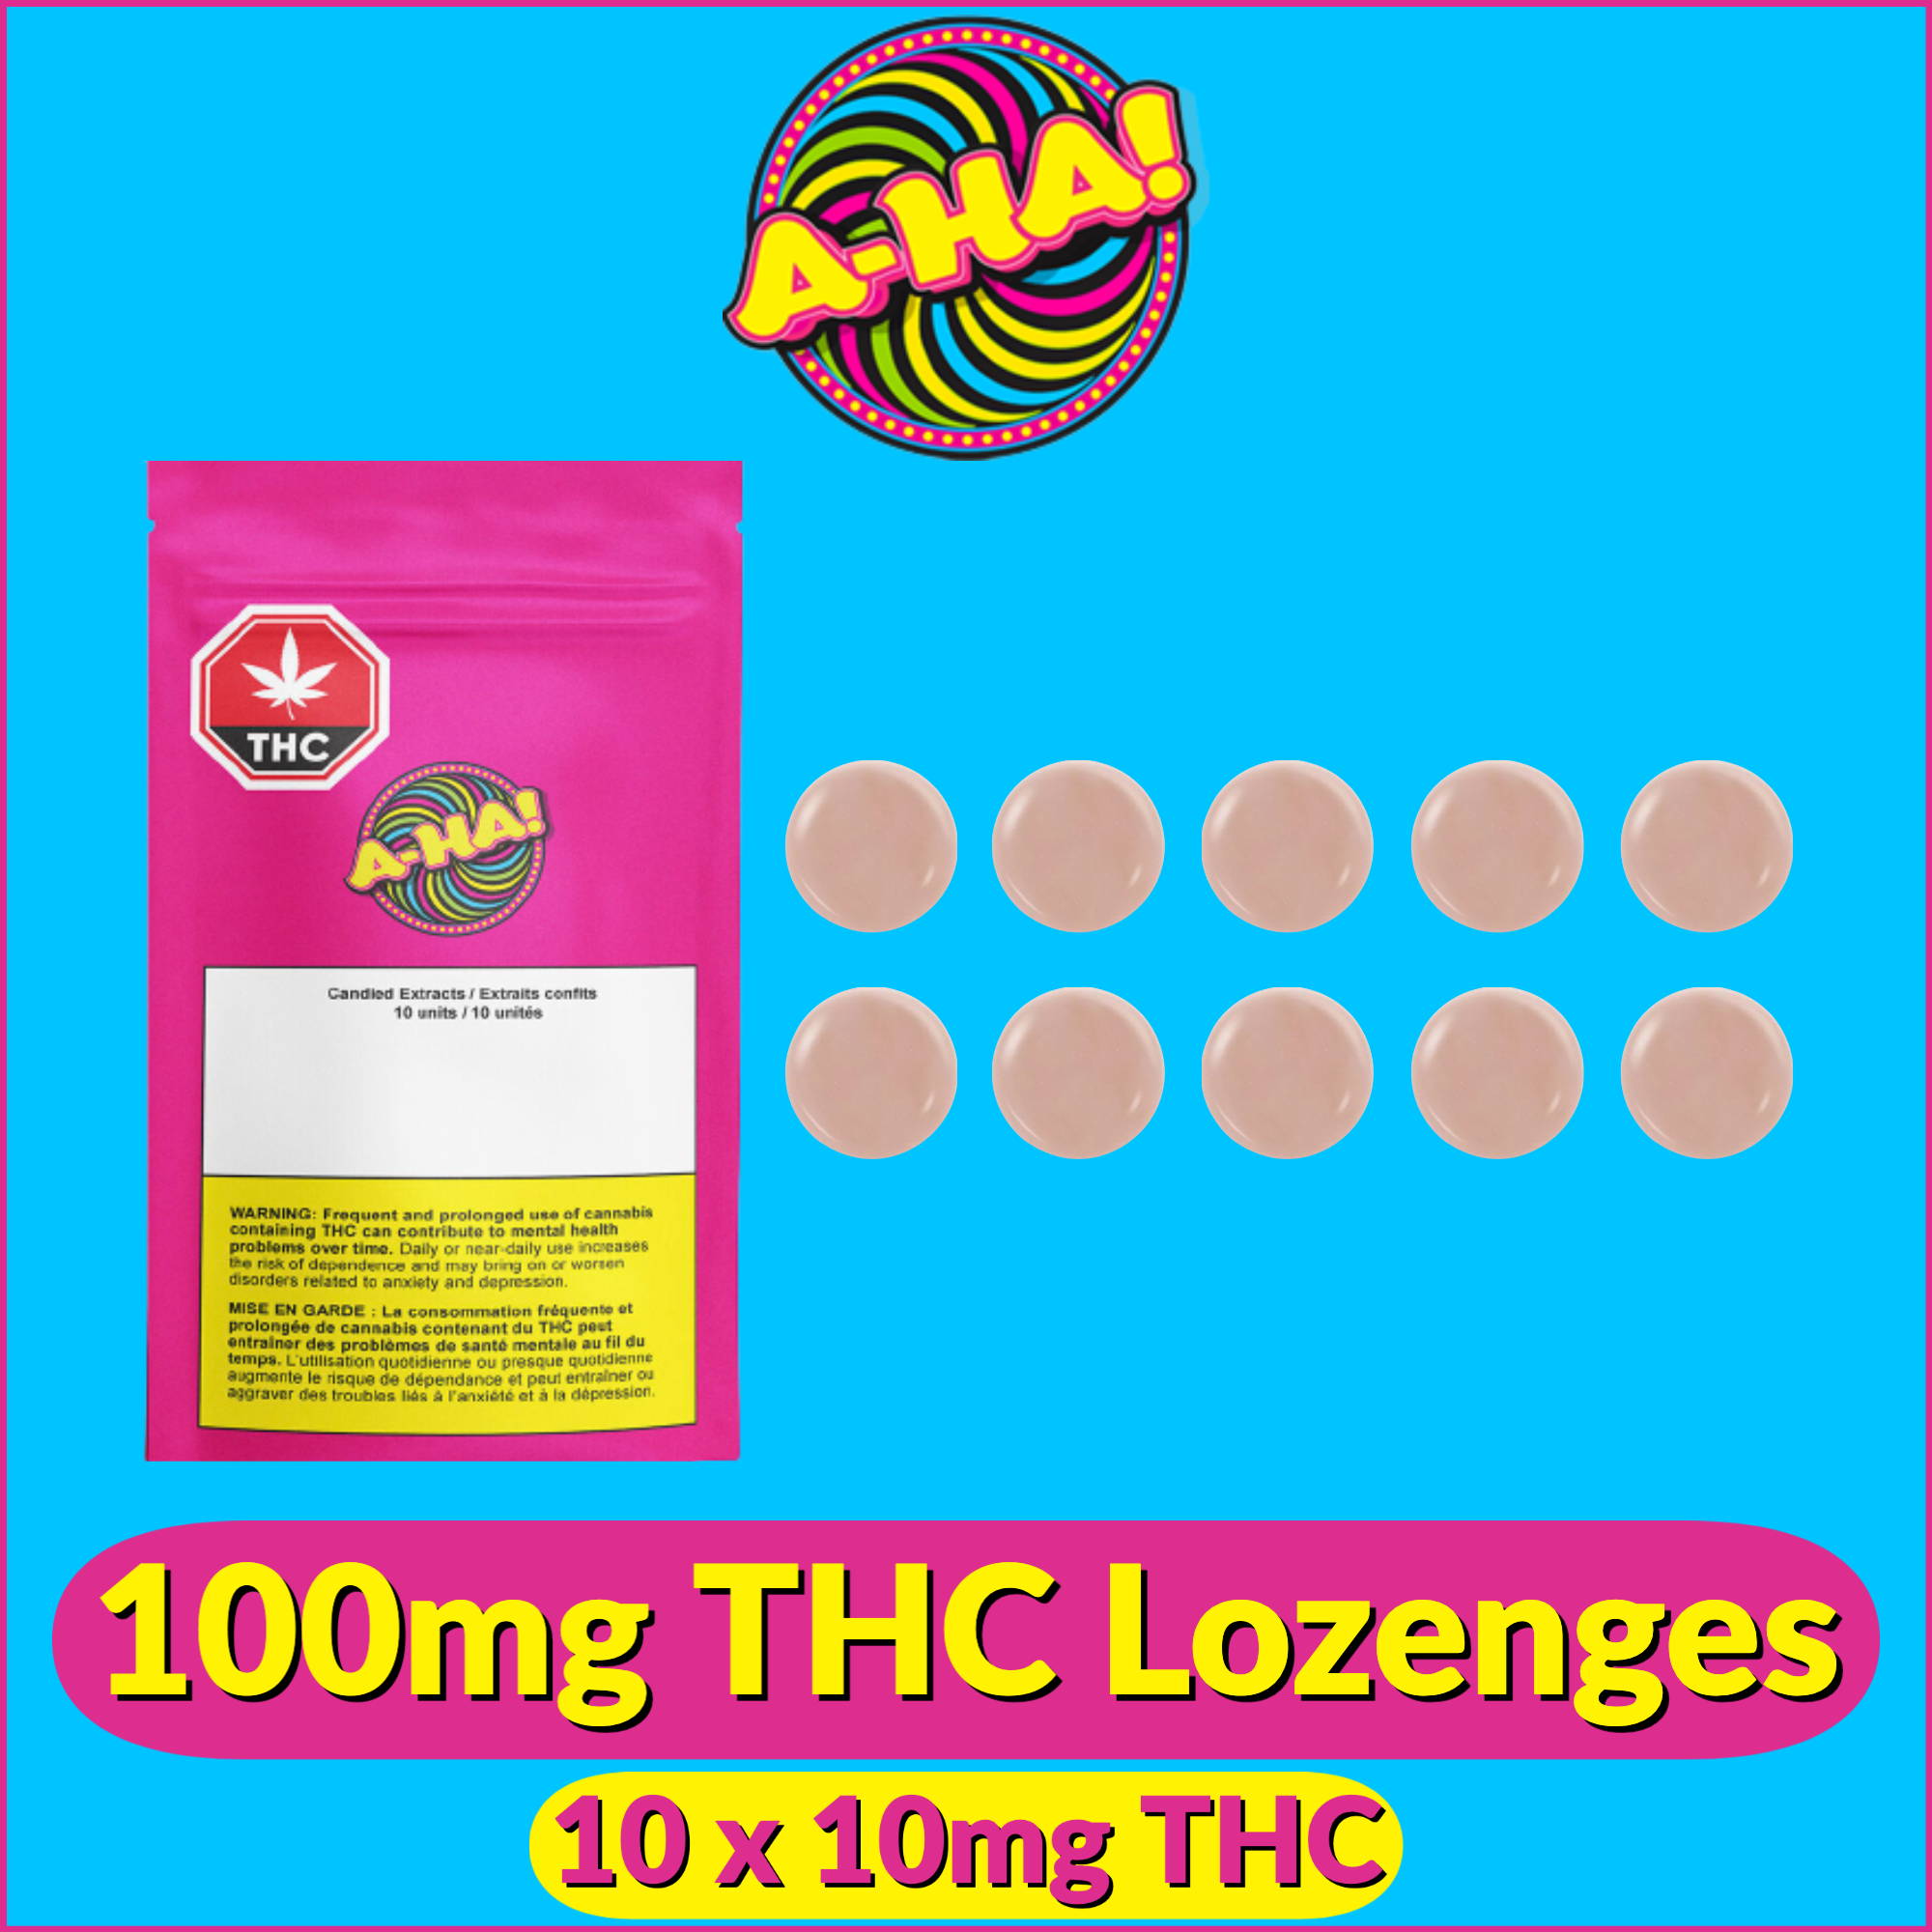 High THC Extract Lozenges by A-Ha! | Jupiter Cannabis